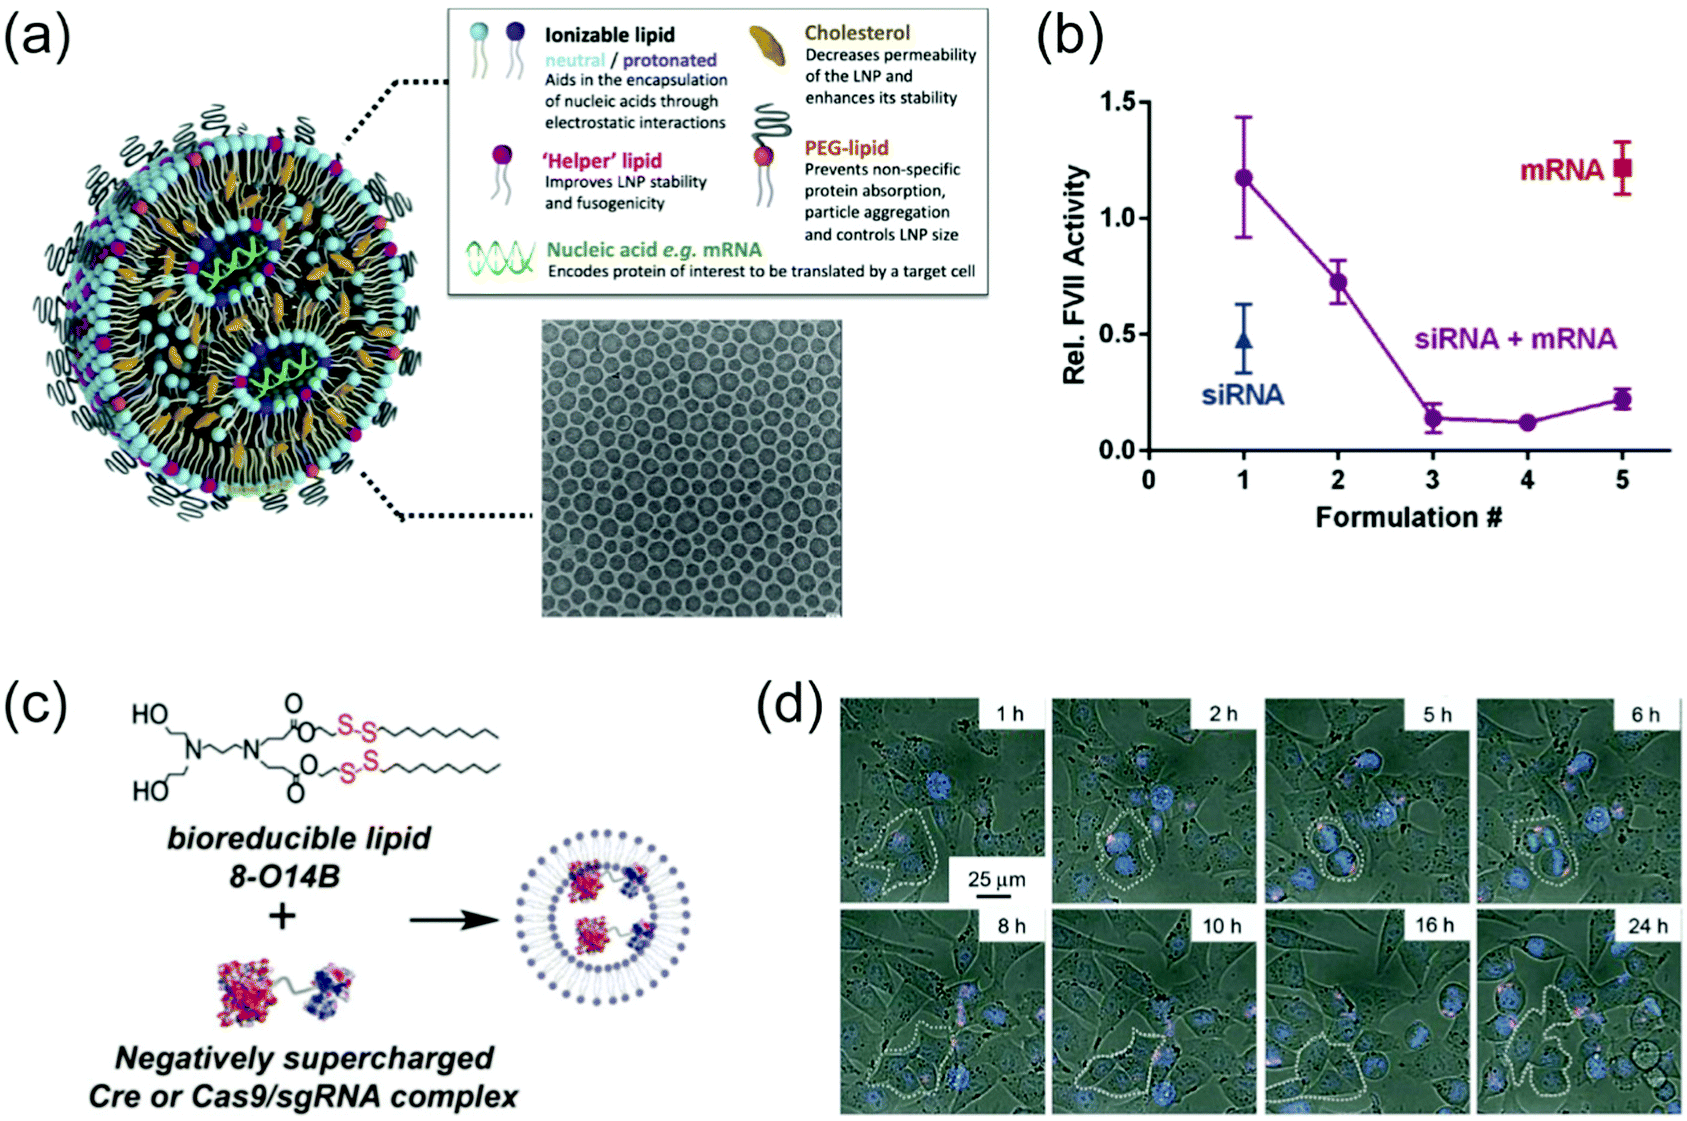 Nanostructured particles assembled from natural building blocks for  advanced therapies - Chemical Society Reviews (RSC Publishing)  DOI:10.1039/D1CS00343G